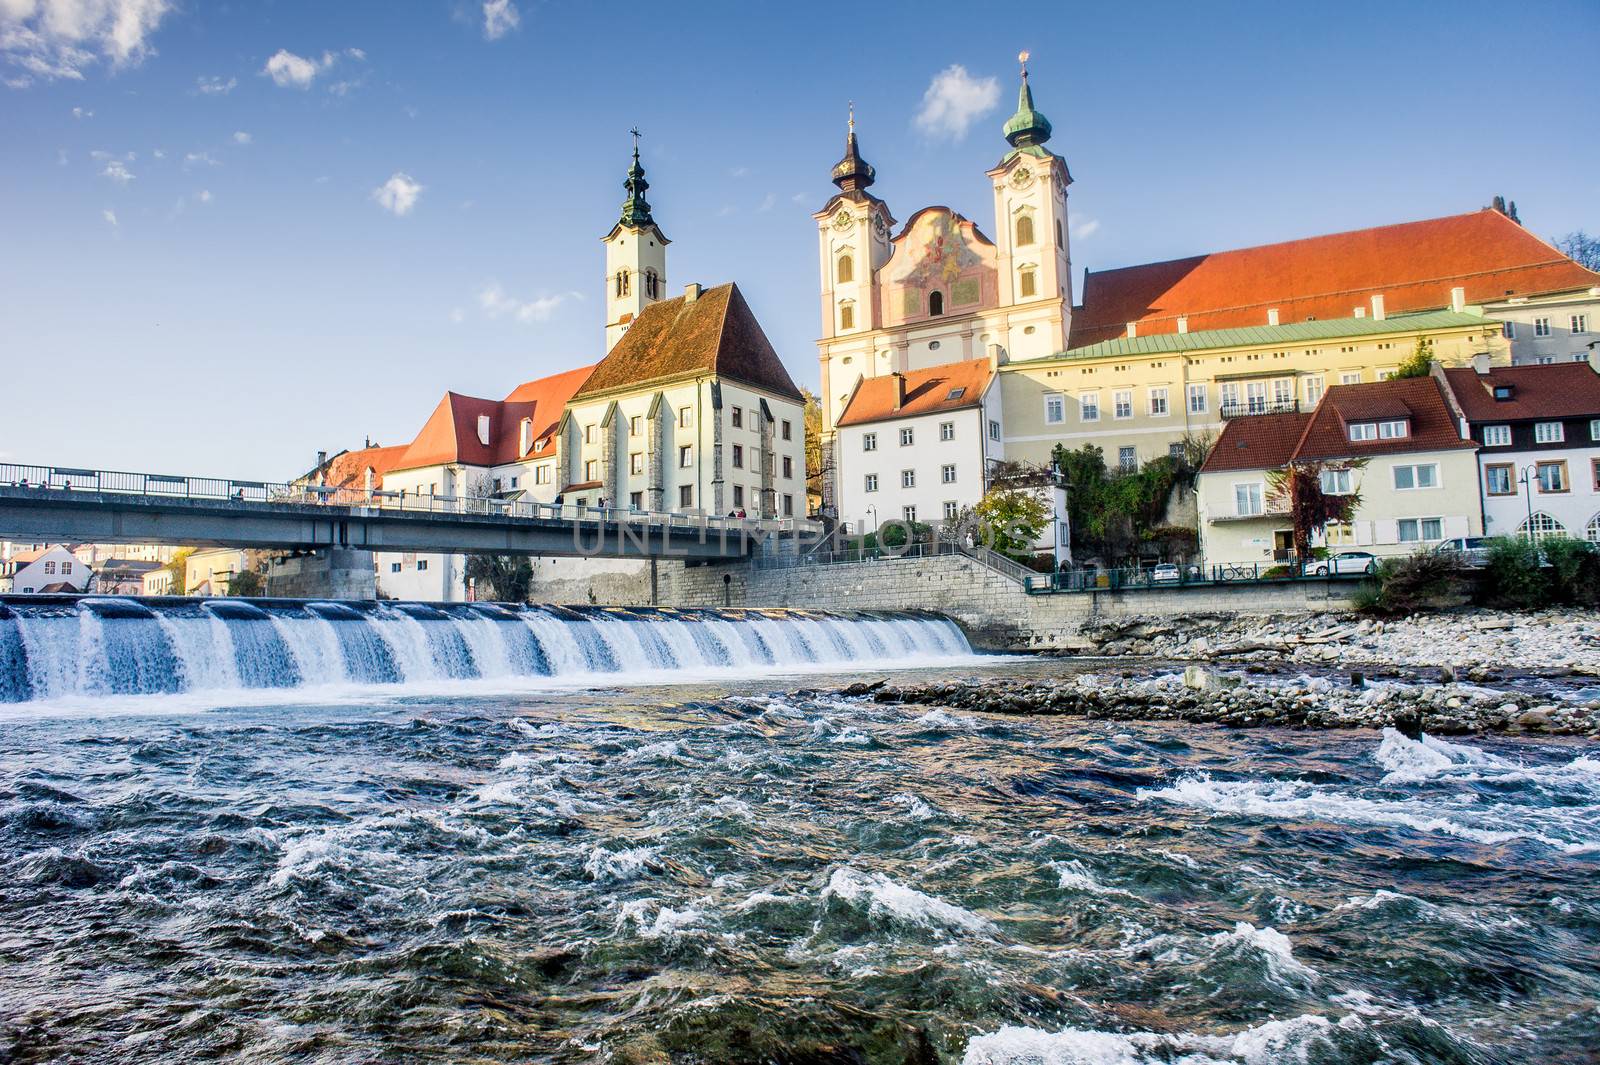 Cityscape of Steyr, a town in upper austria